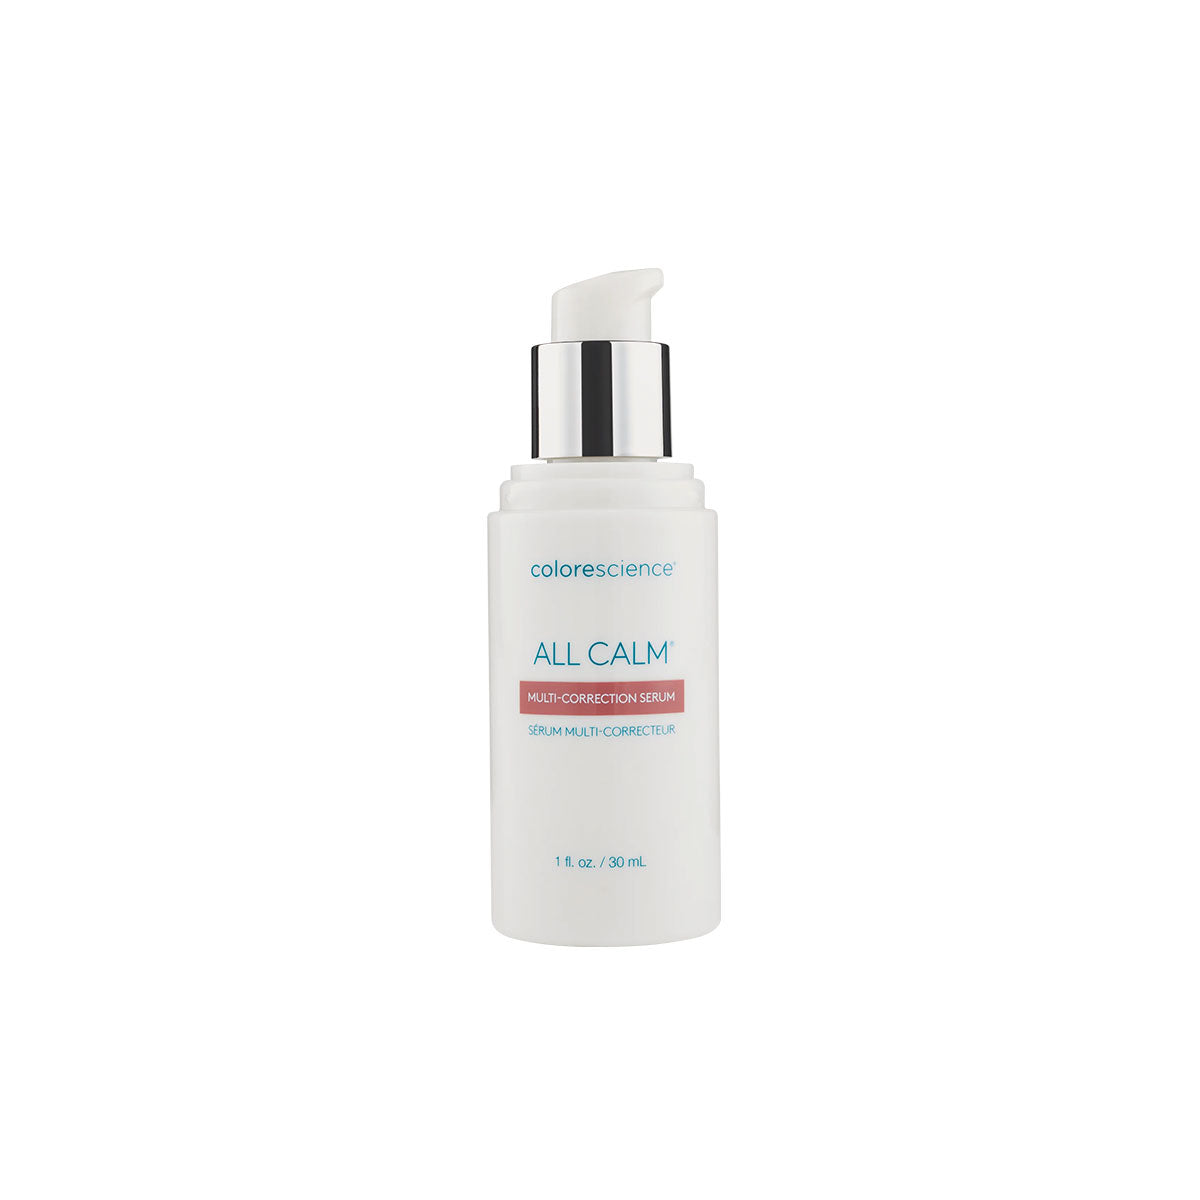 30mL colorescience all calm multi correction serum for redness or rosacea with cap off